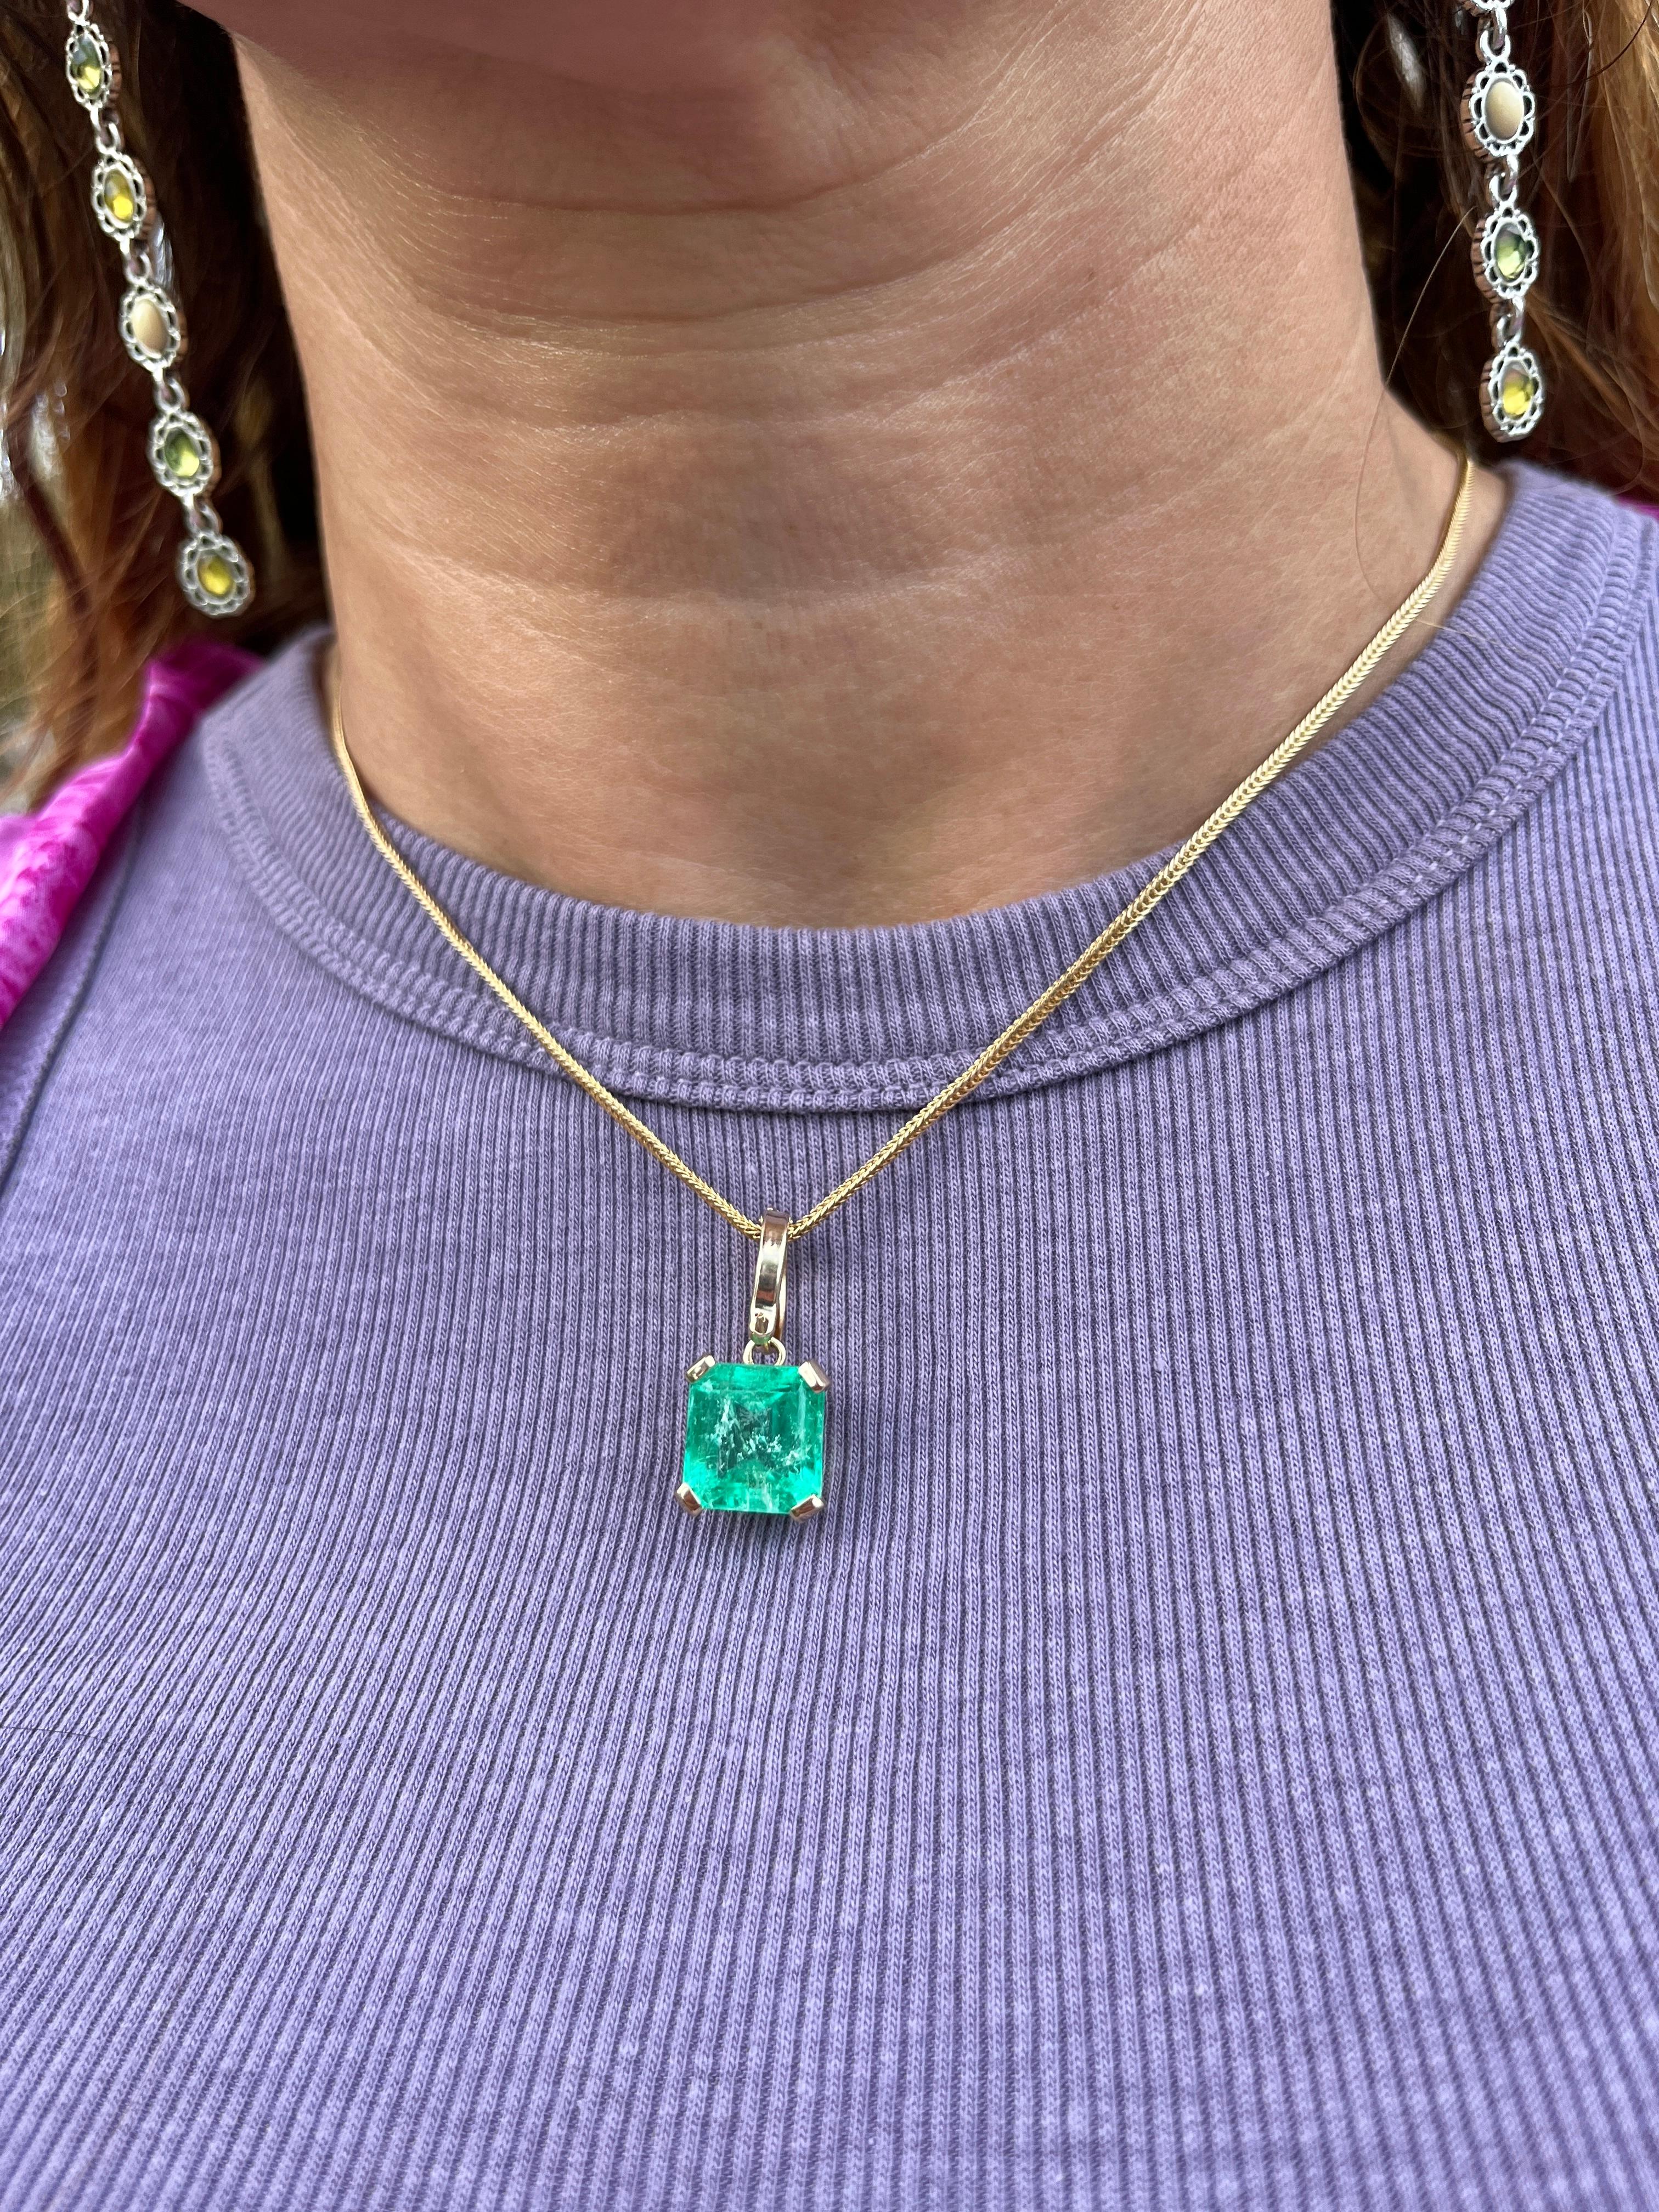 8.34 Carat Colombian Emerald Solitaire Pendant Necklace in 14K Gold For Sale 1